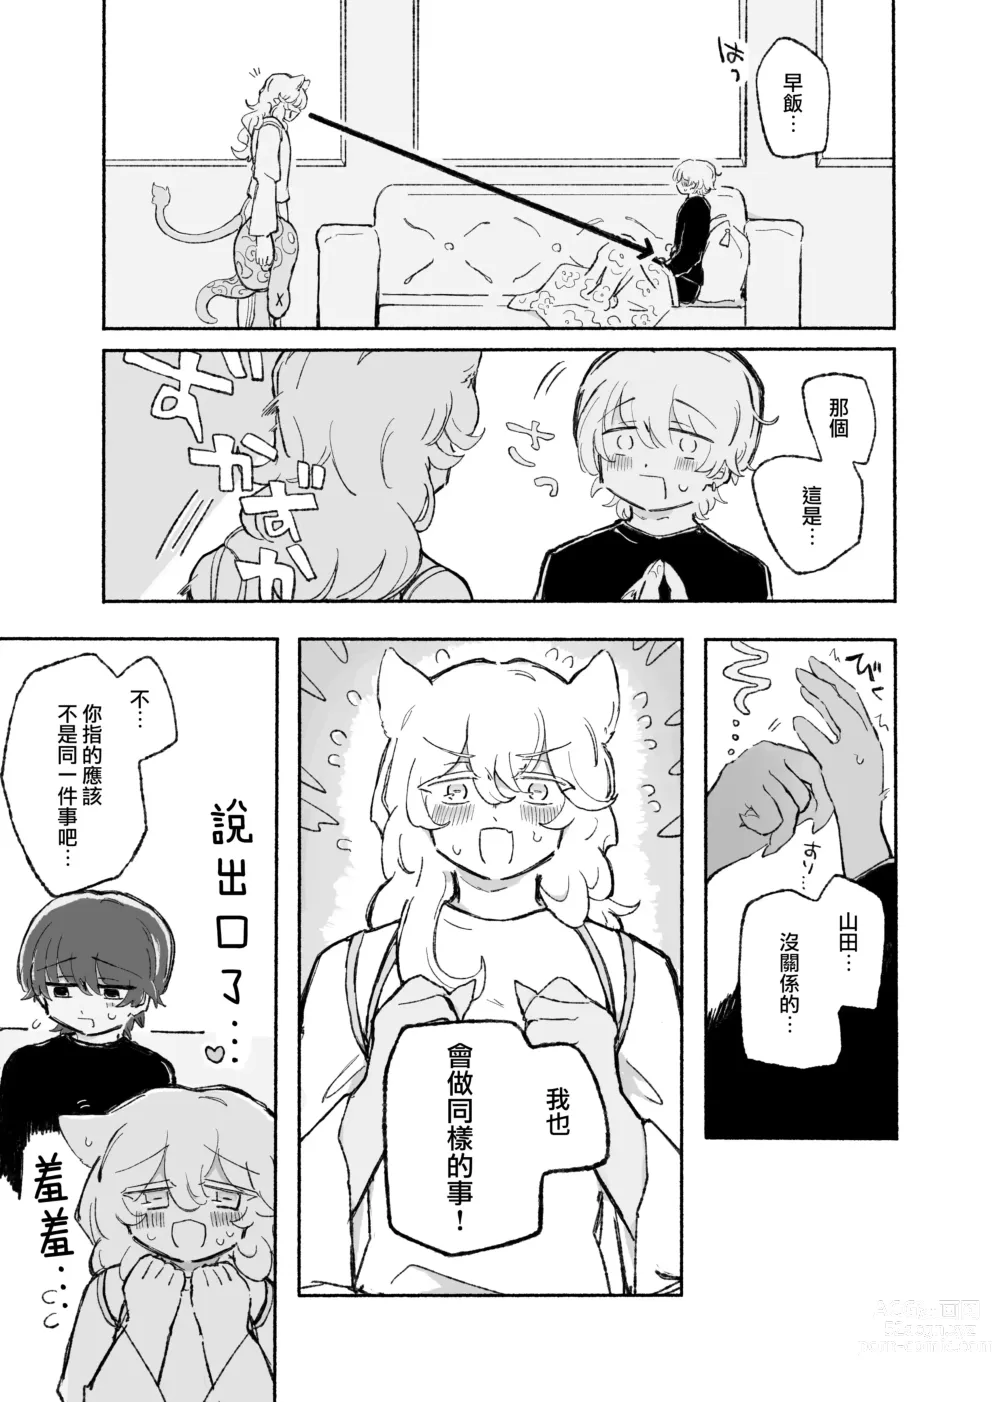 Page 15 of doujinshi 零之惡魔